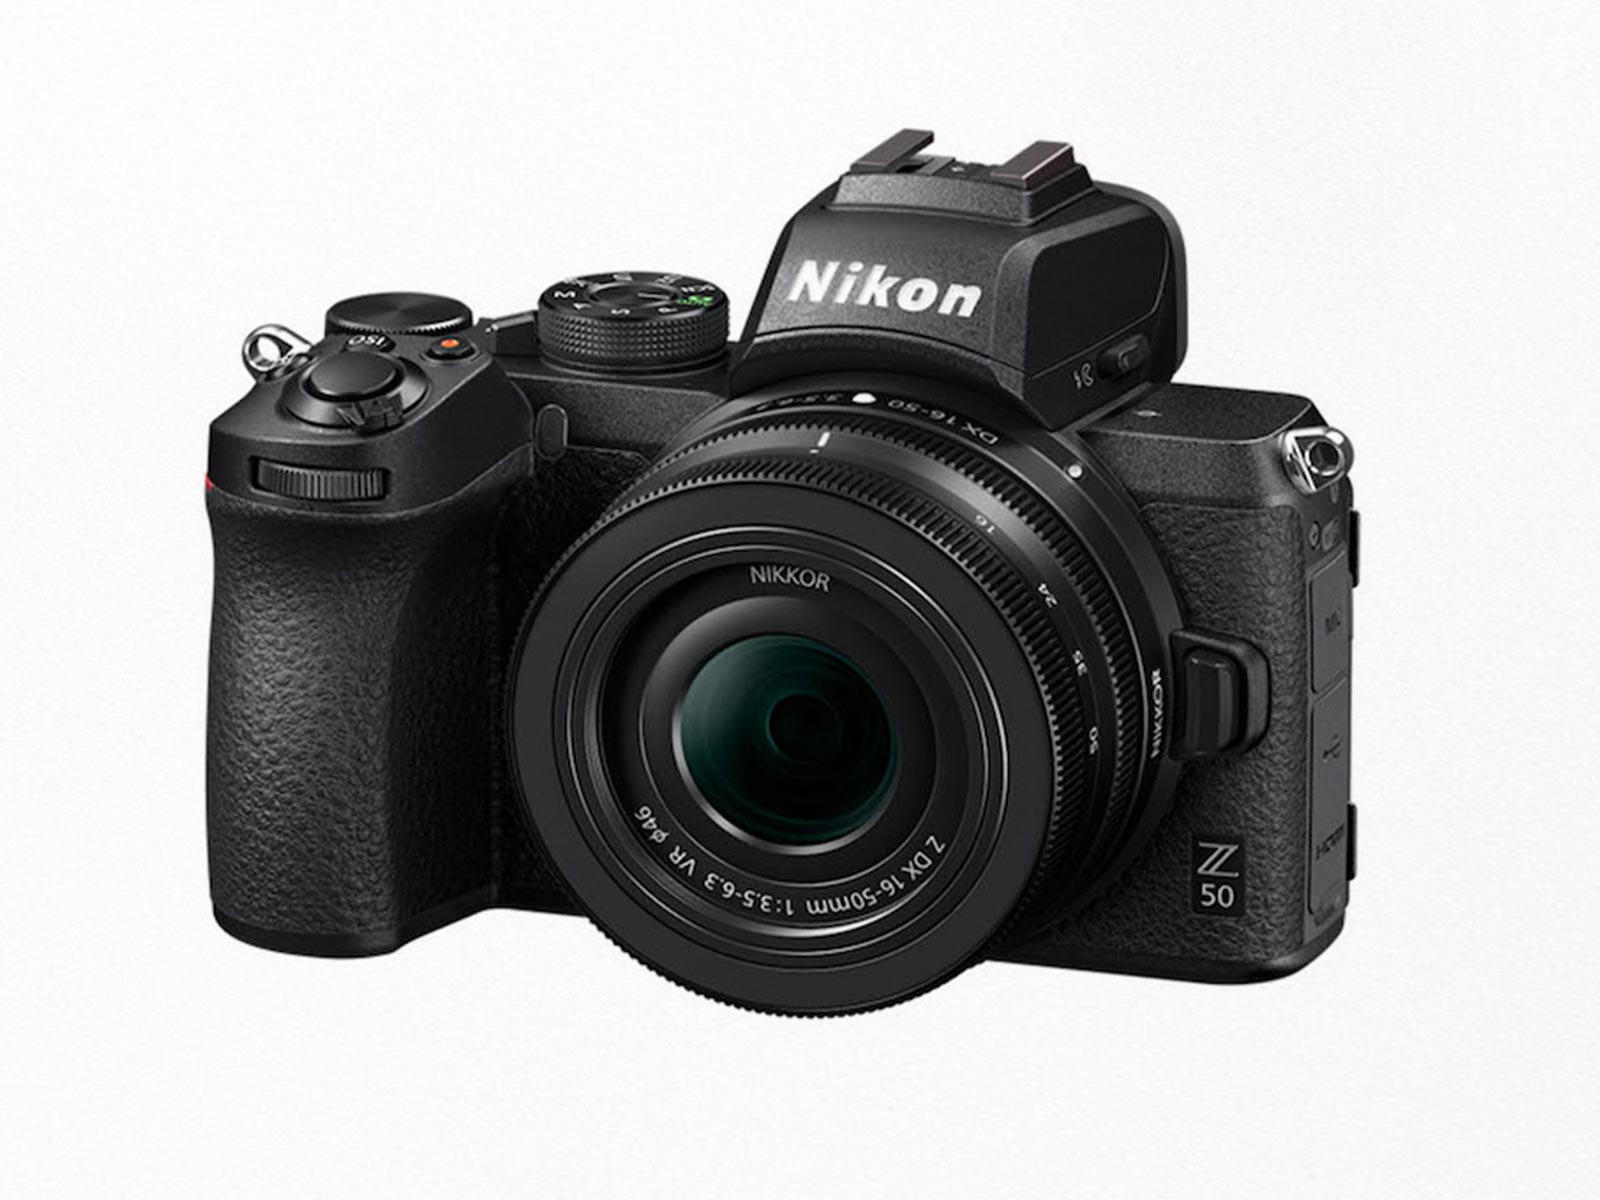 Are you a content creator? Nikon’s new camera is made for you